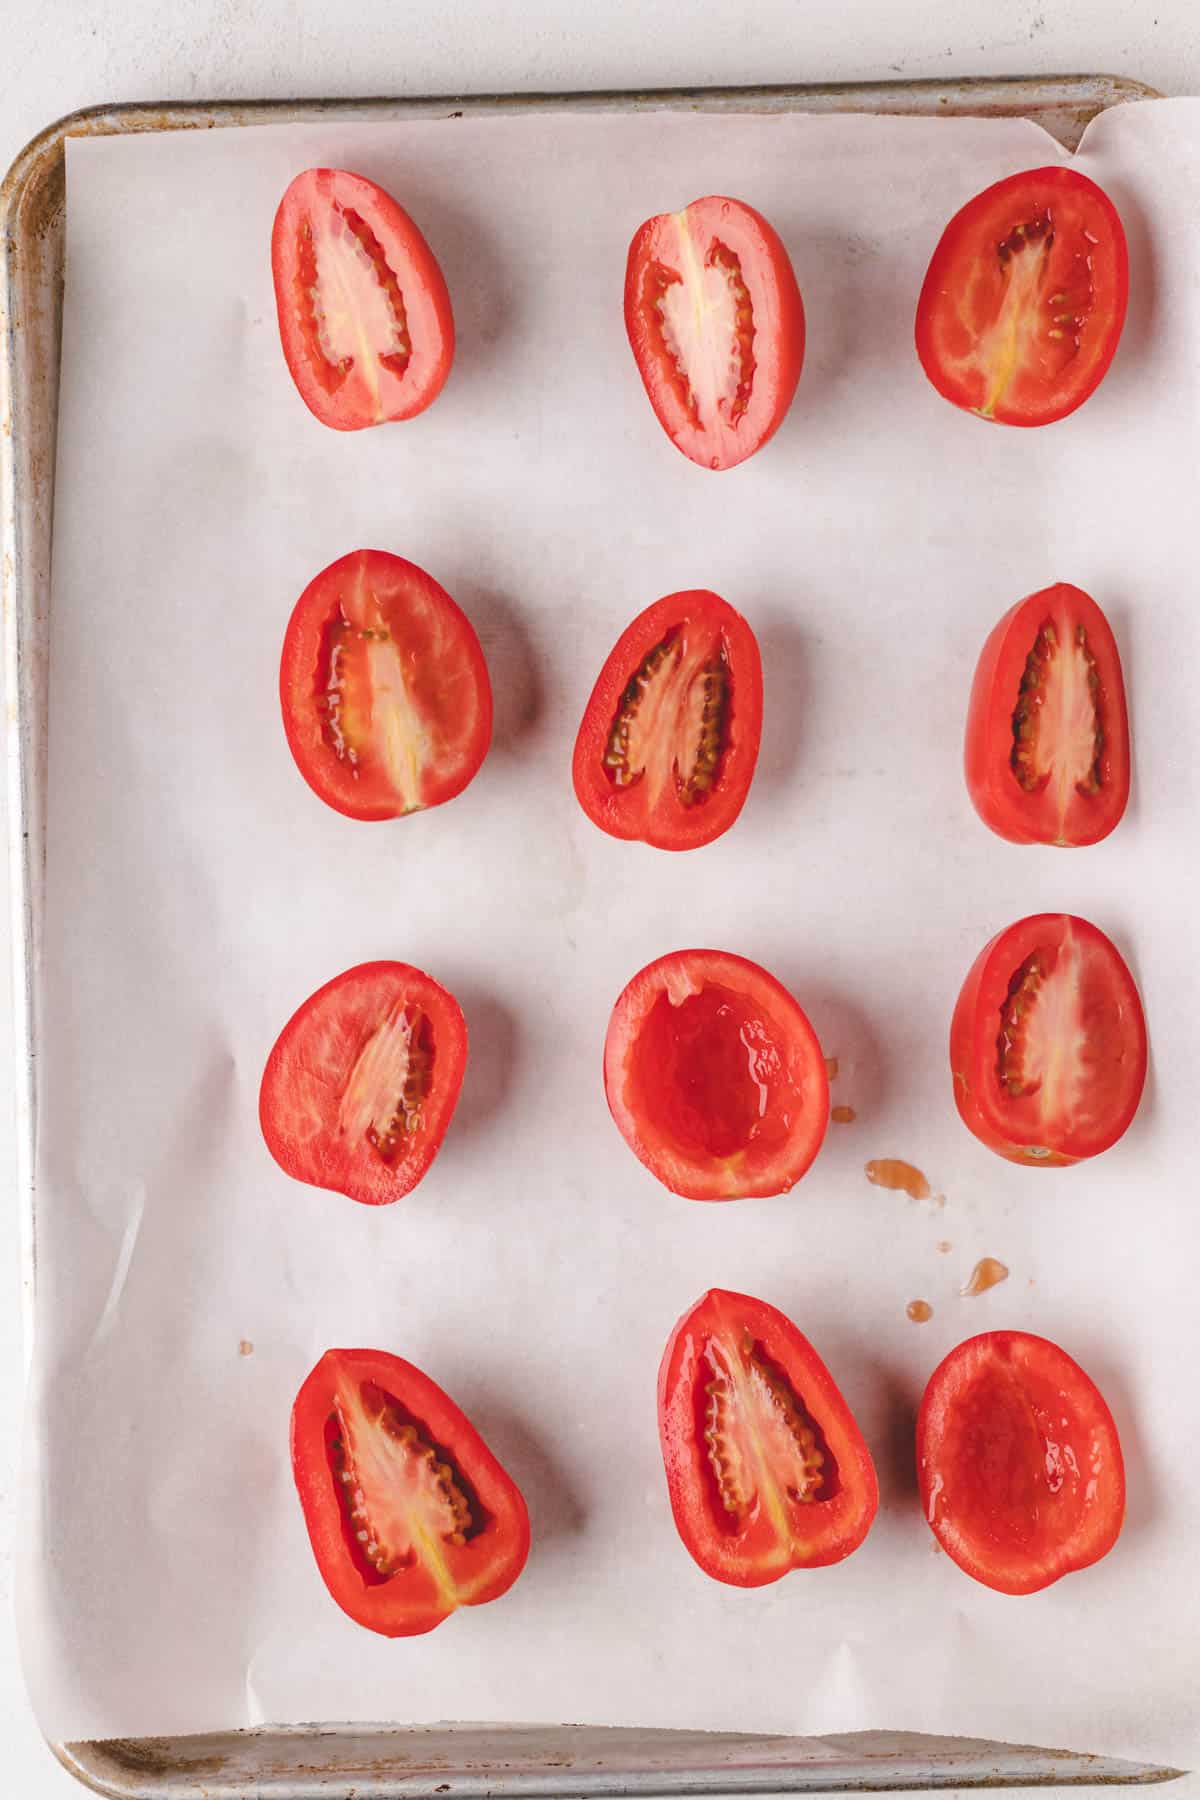 Roma tomatoes that have been cut in half and are placed on a baking tray, ready for slow roasting.